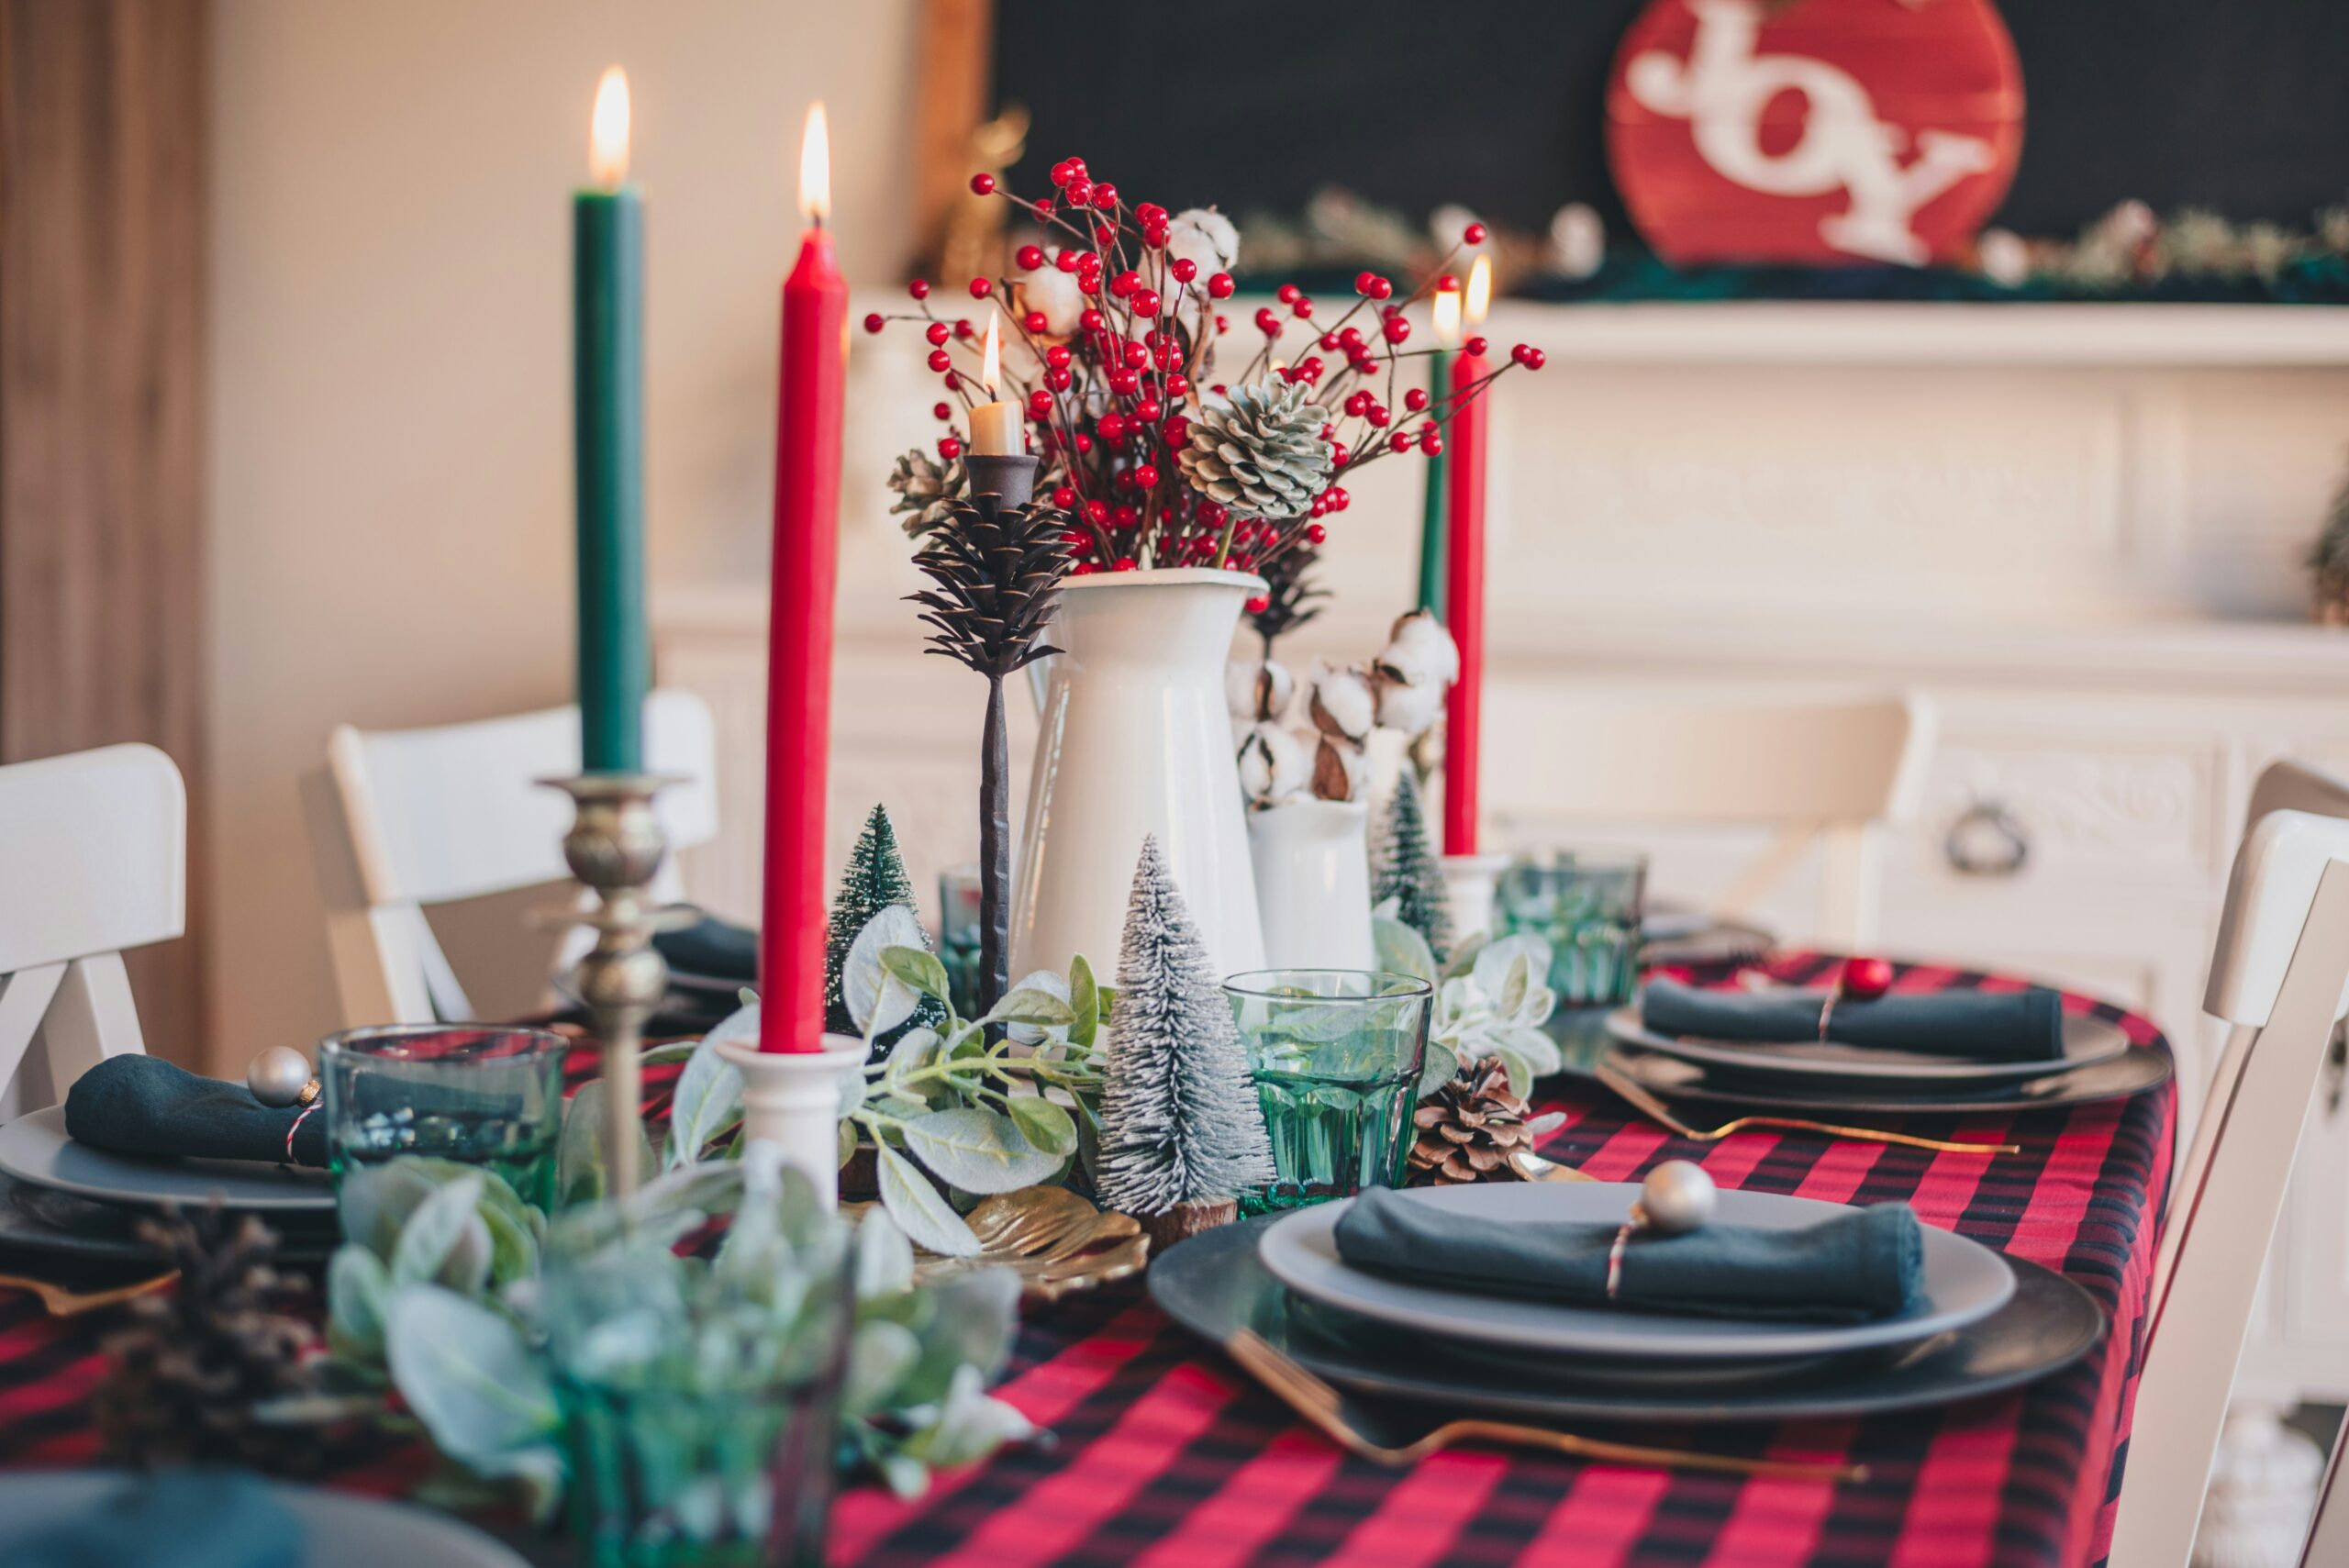 Utilize Kwanzaa colors in your dining room with tablecloth, a table runner, plates, candles, napkins and silverware. Pictured: A dining room table with black, red and green Holiday decor.